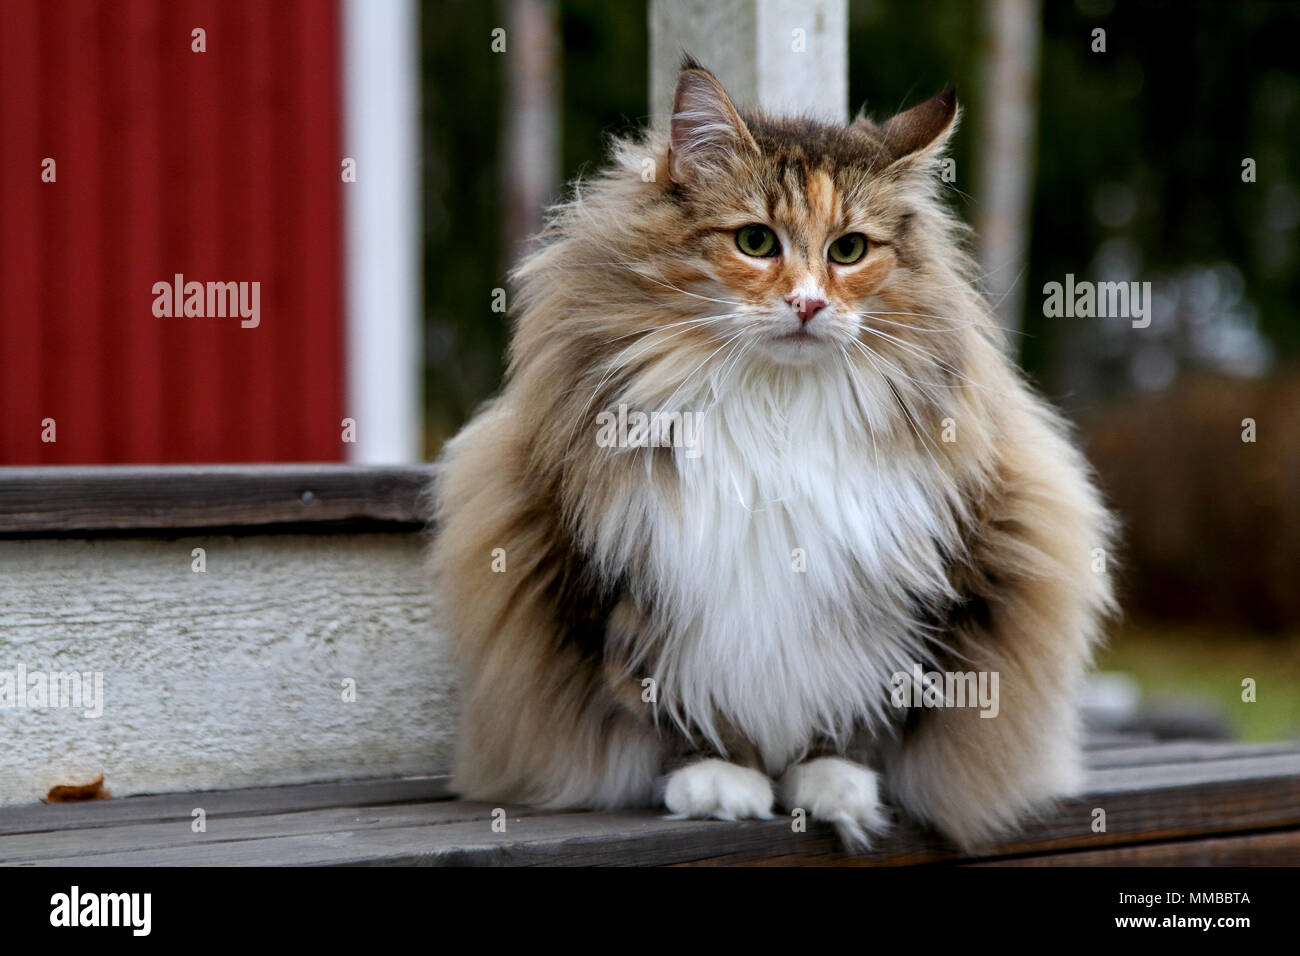 Norwegian forest cat female sitting on stairs outdoors Stock Photo